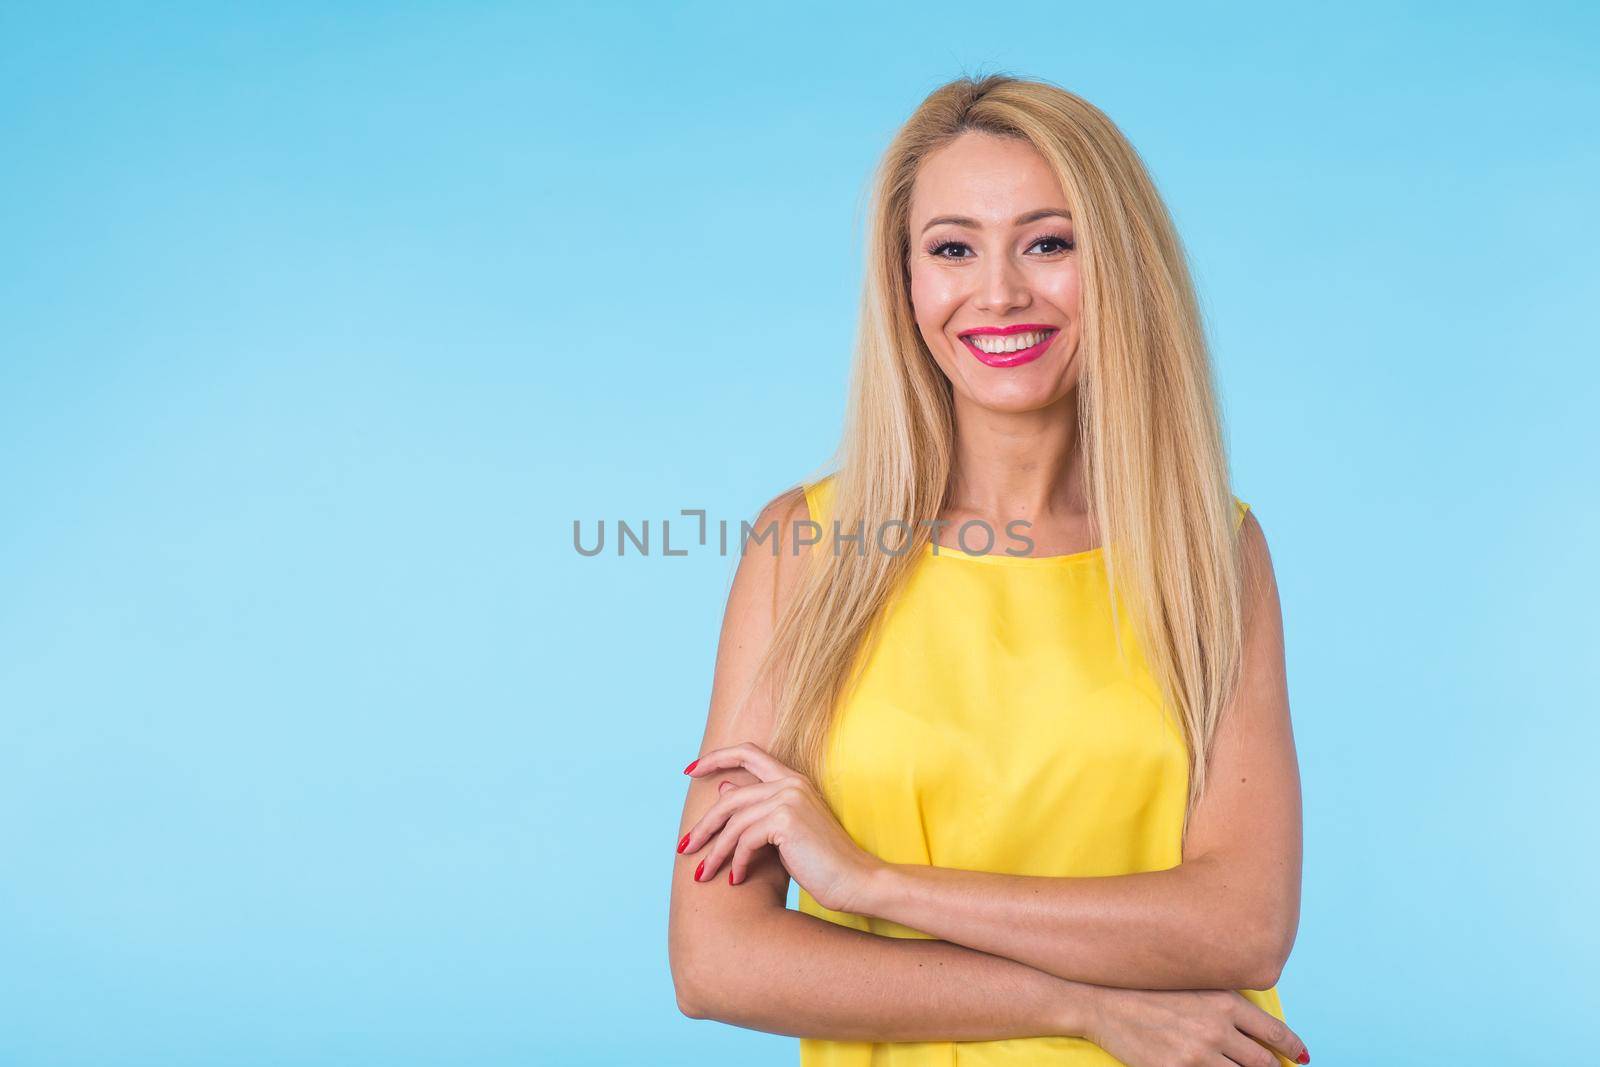 beauty fashion summer portrait of blonde woman with red lips and yellow dress on blue background with copy space.